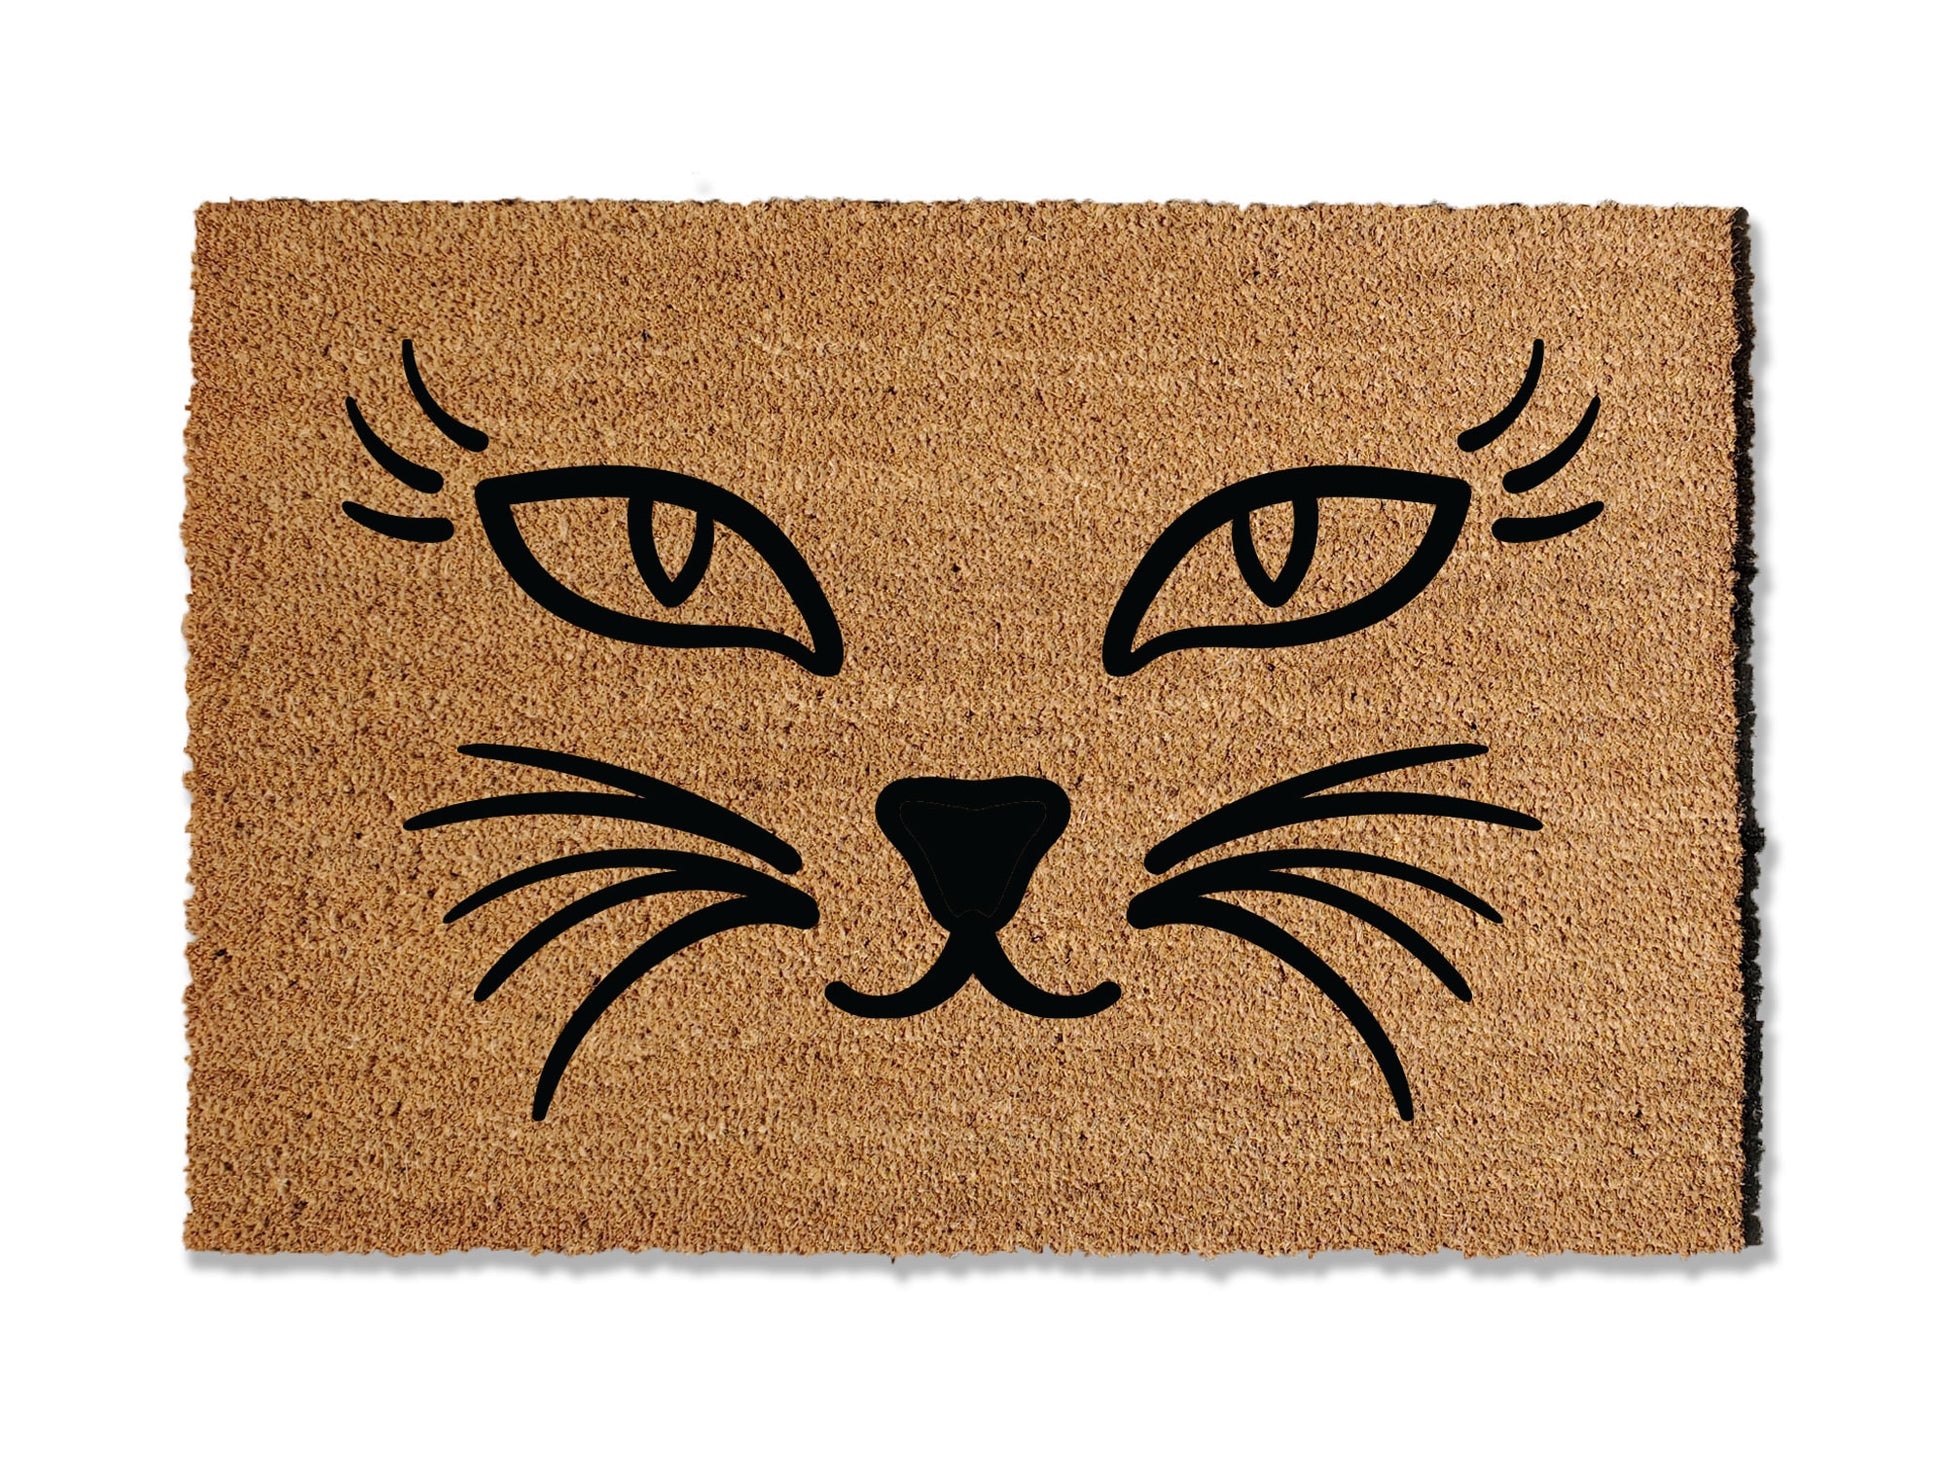 Custom 1/2 inch thick coir doormat featuring a charming cat face design. Personalize your entryway with this delightful mat, which not only adds a touch of canine charm but is also highly effective at trapping dirt, ensuring a clean and inviting home.